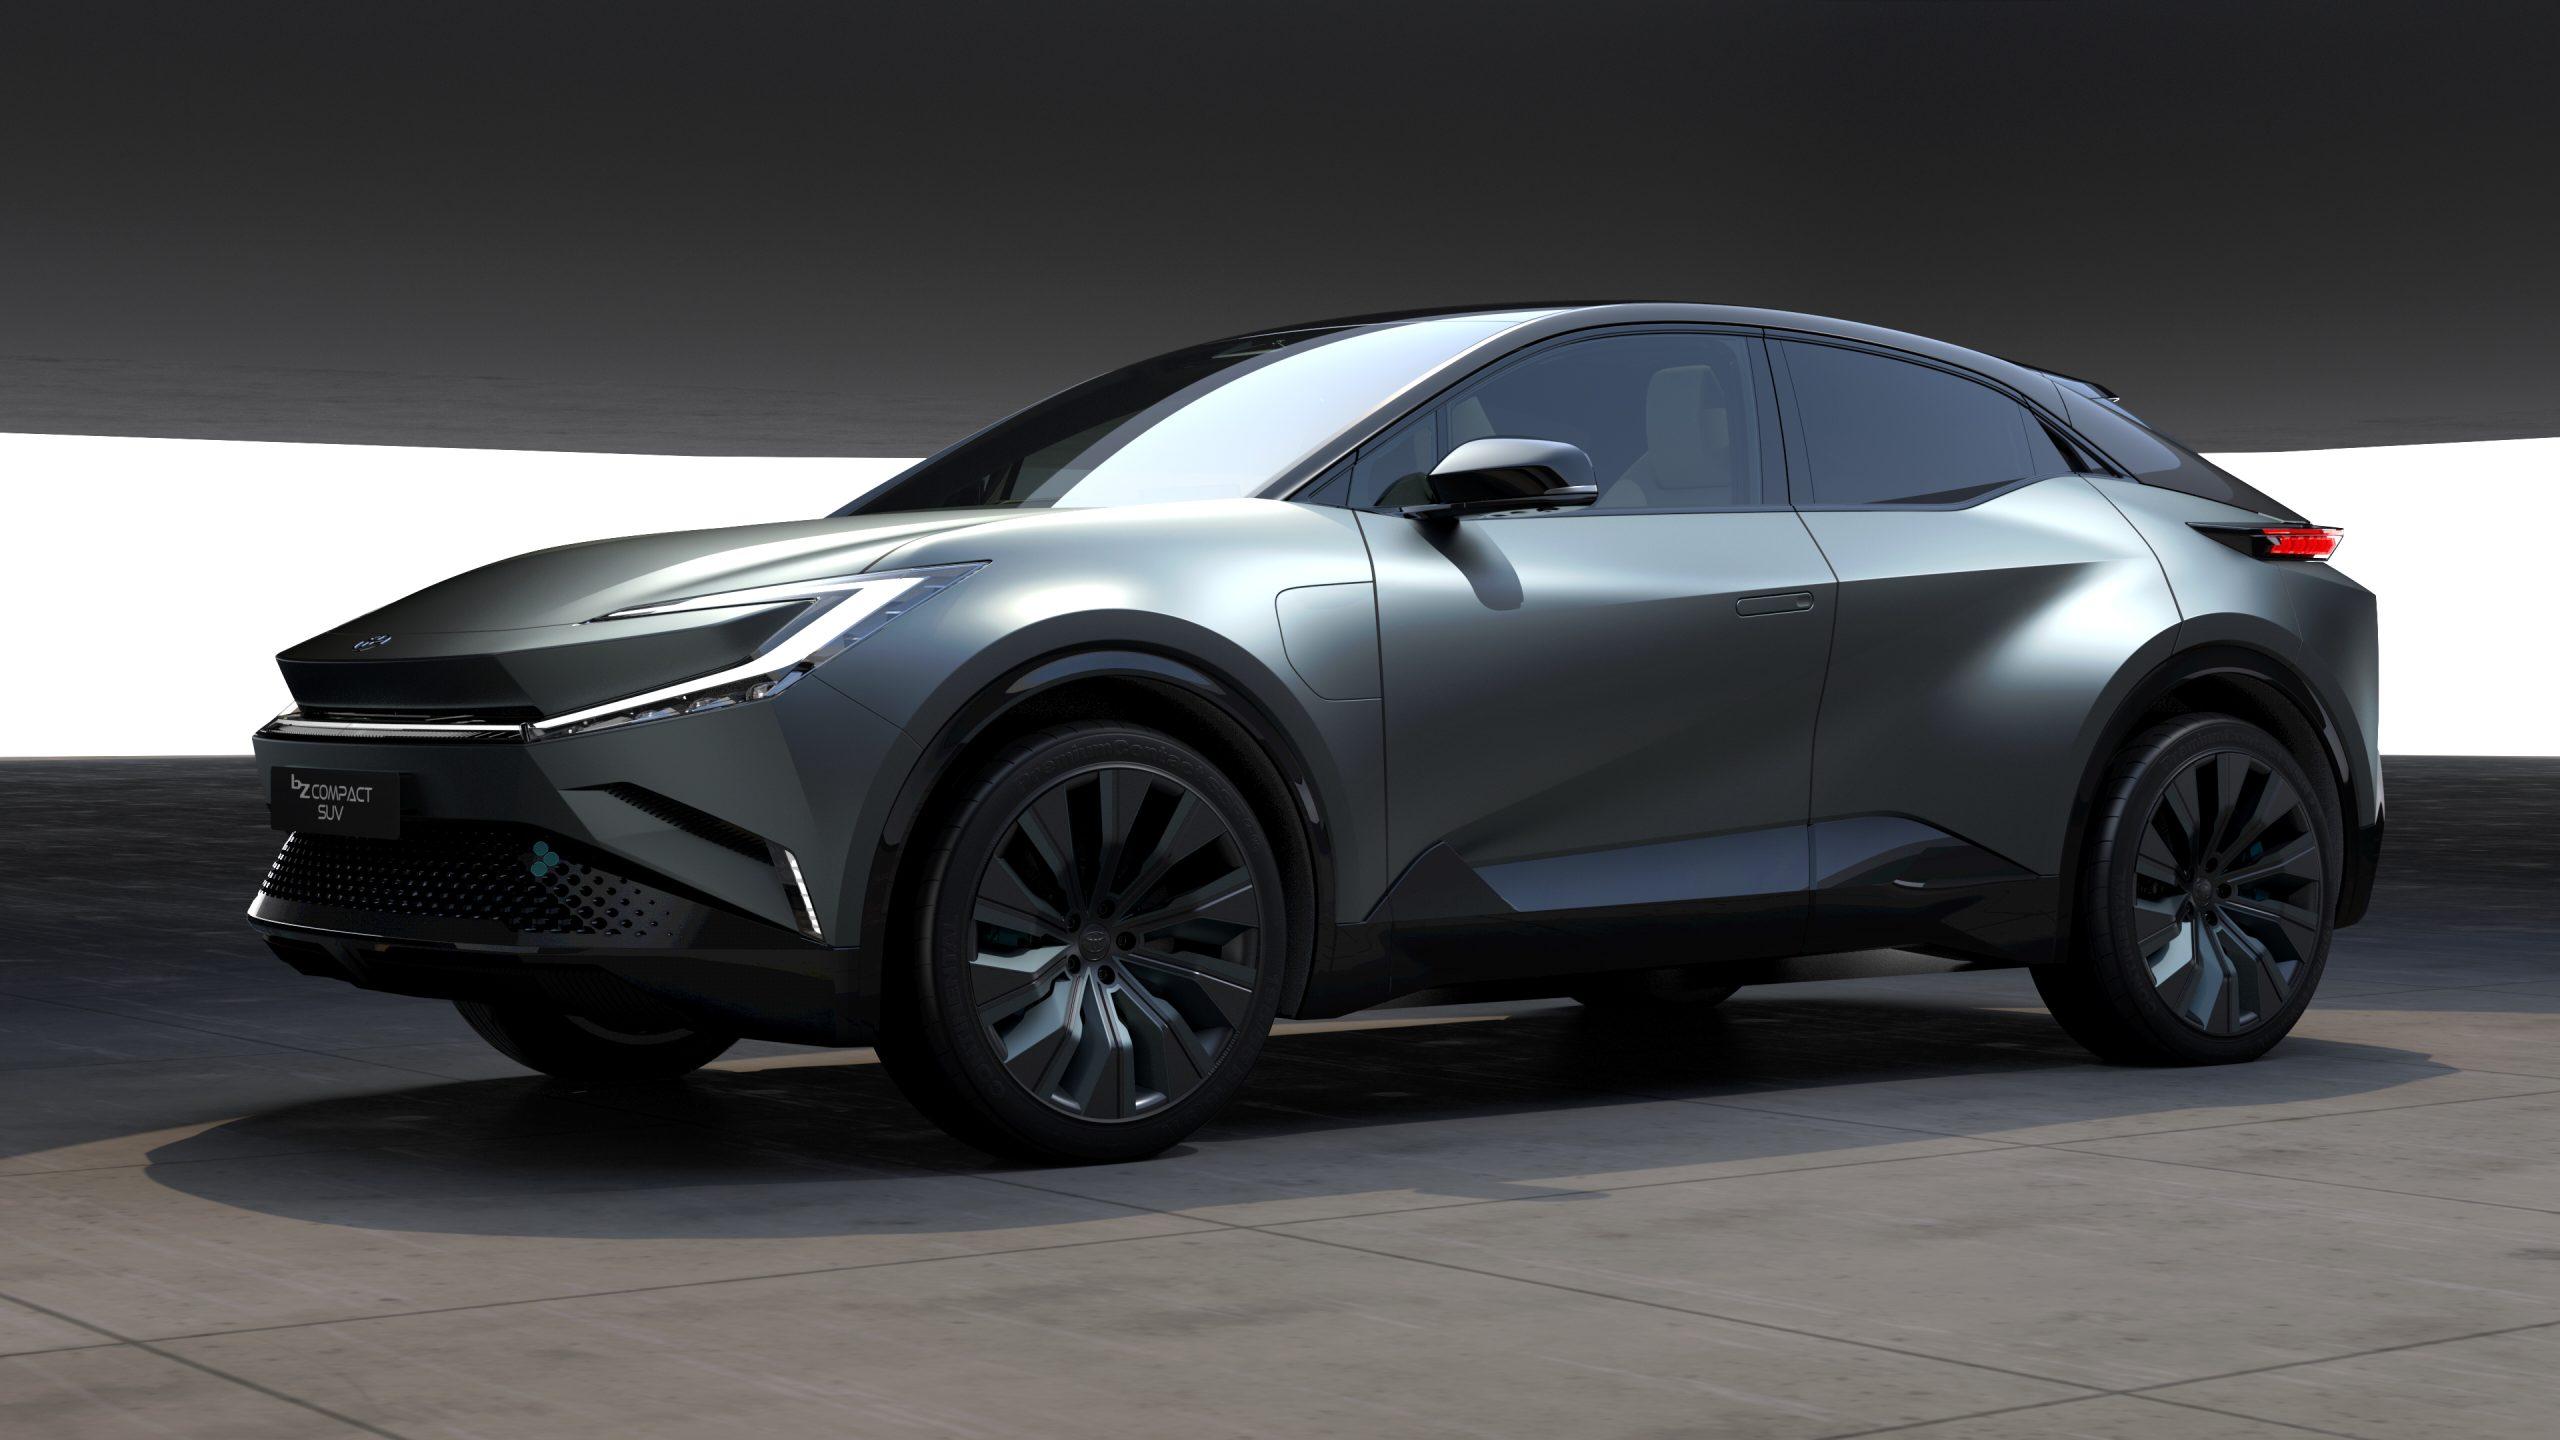 A glimpse of the future: Toyota bZ Compact SUV Concept Revealed